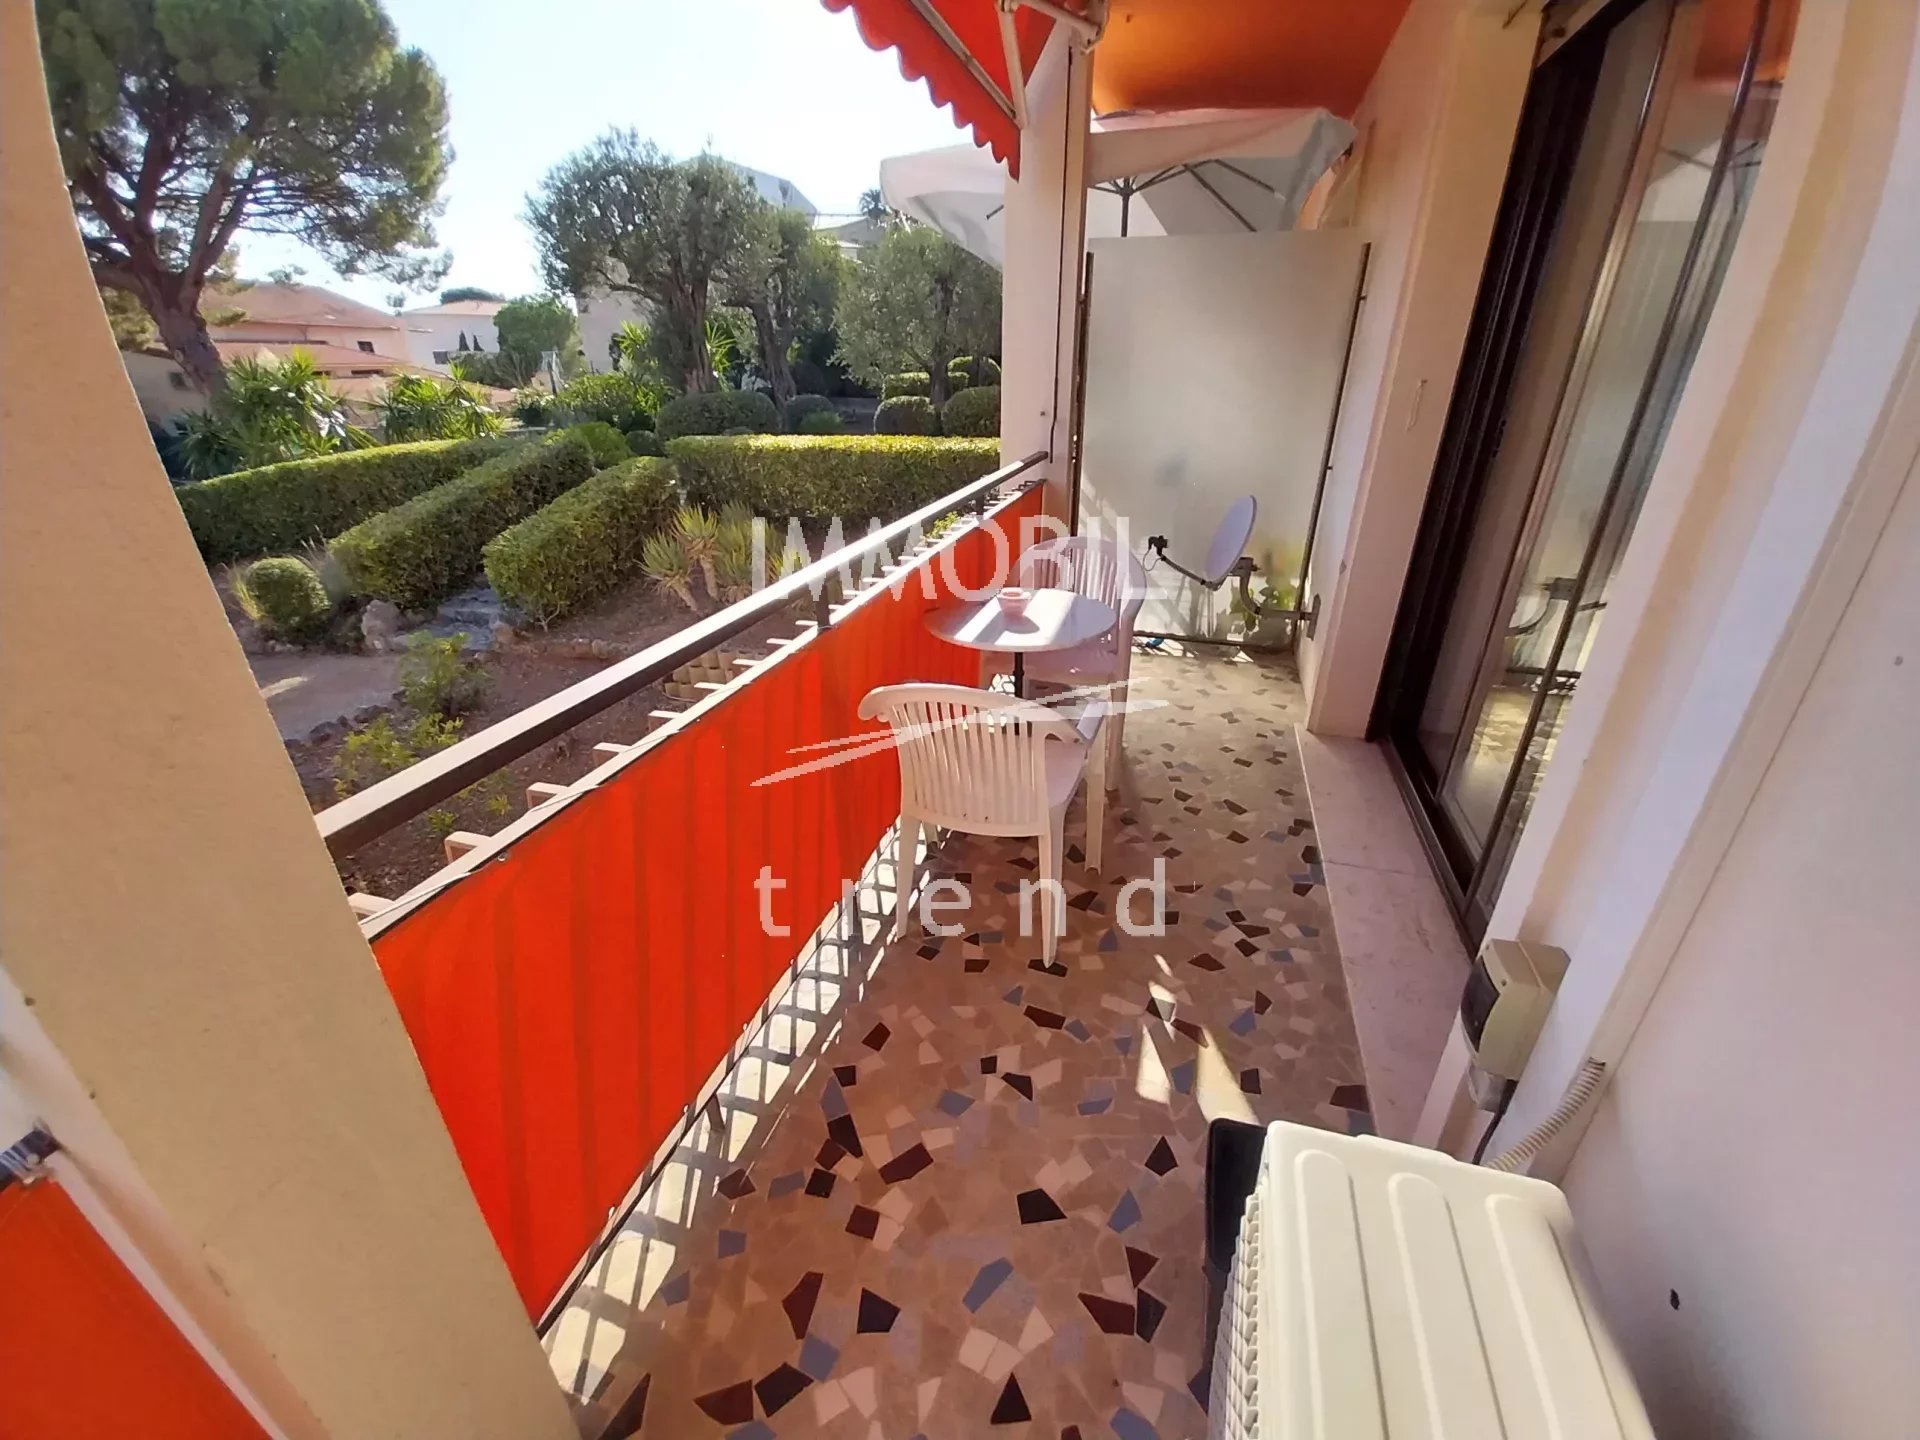 ROQUEBRUNE CAP MARTIN REAL ESTATE - 1 bedroom apartment with terrace cellar and private parking for sale